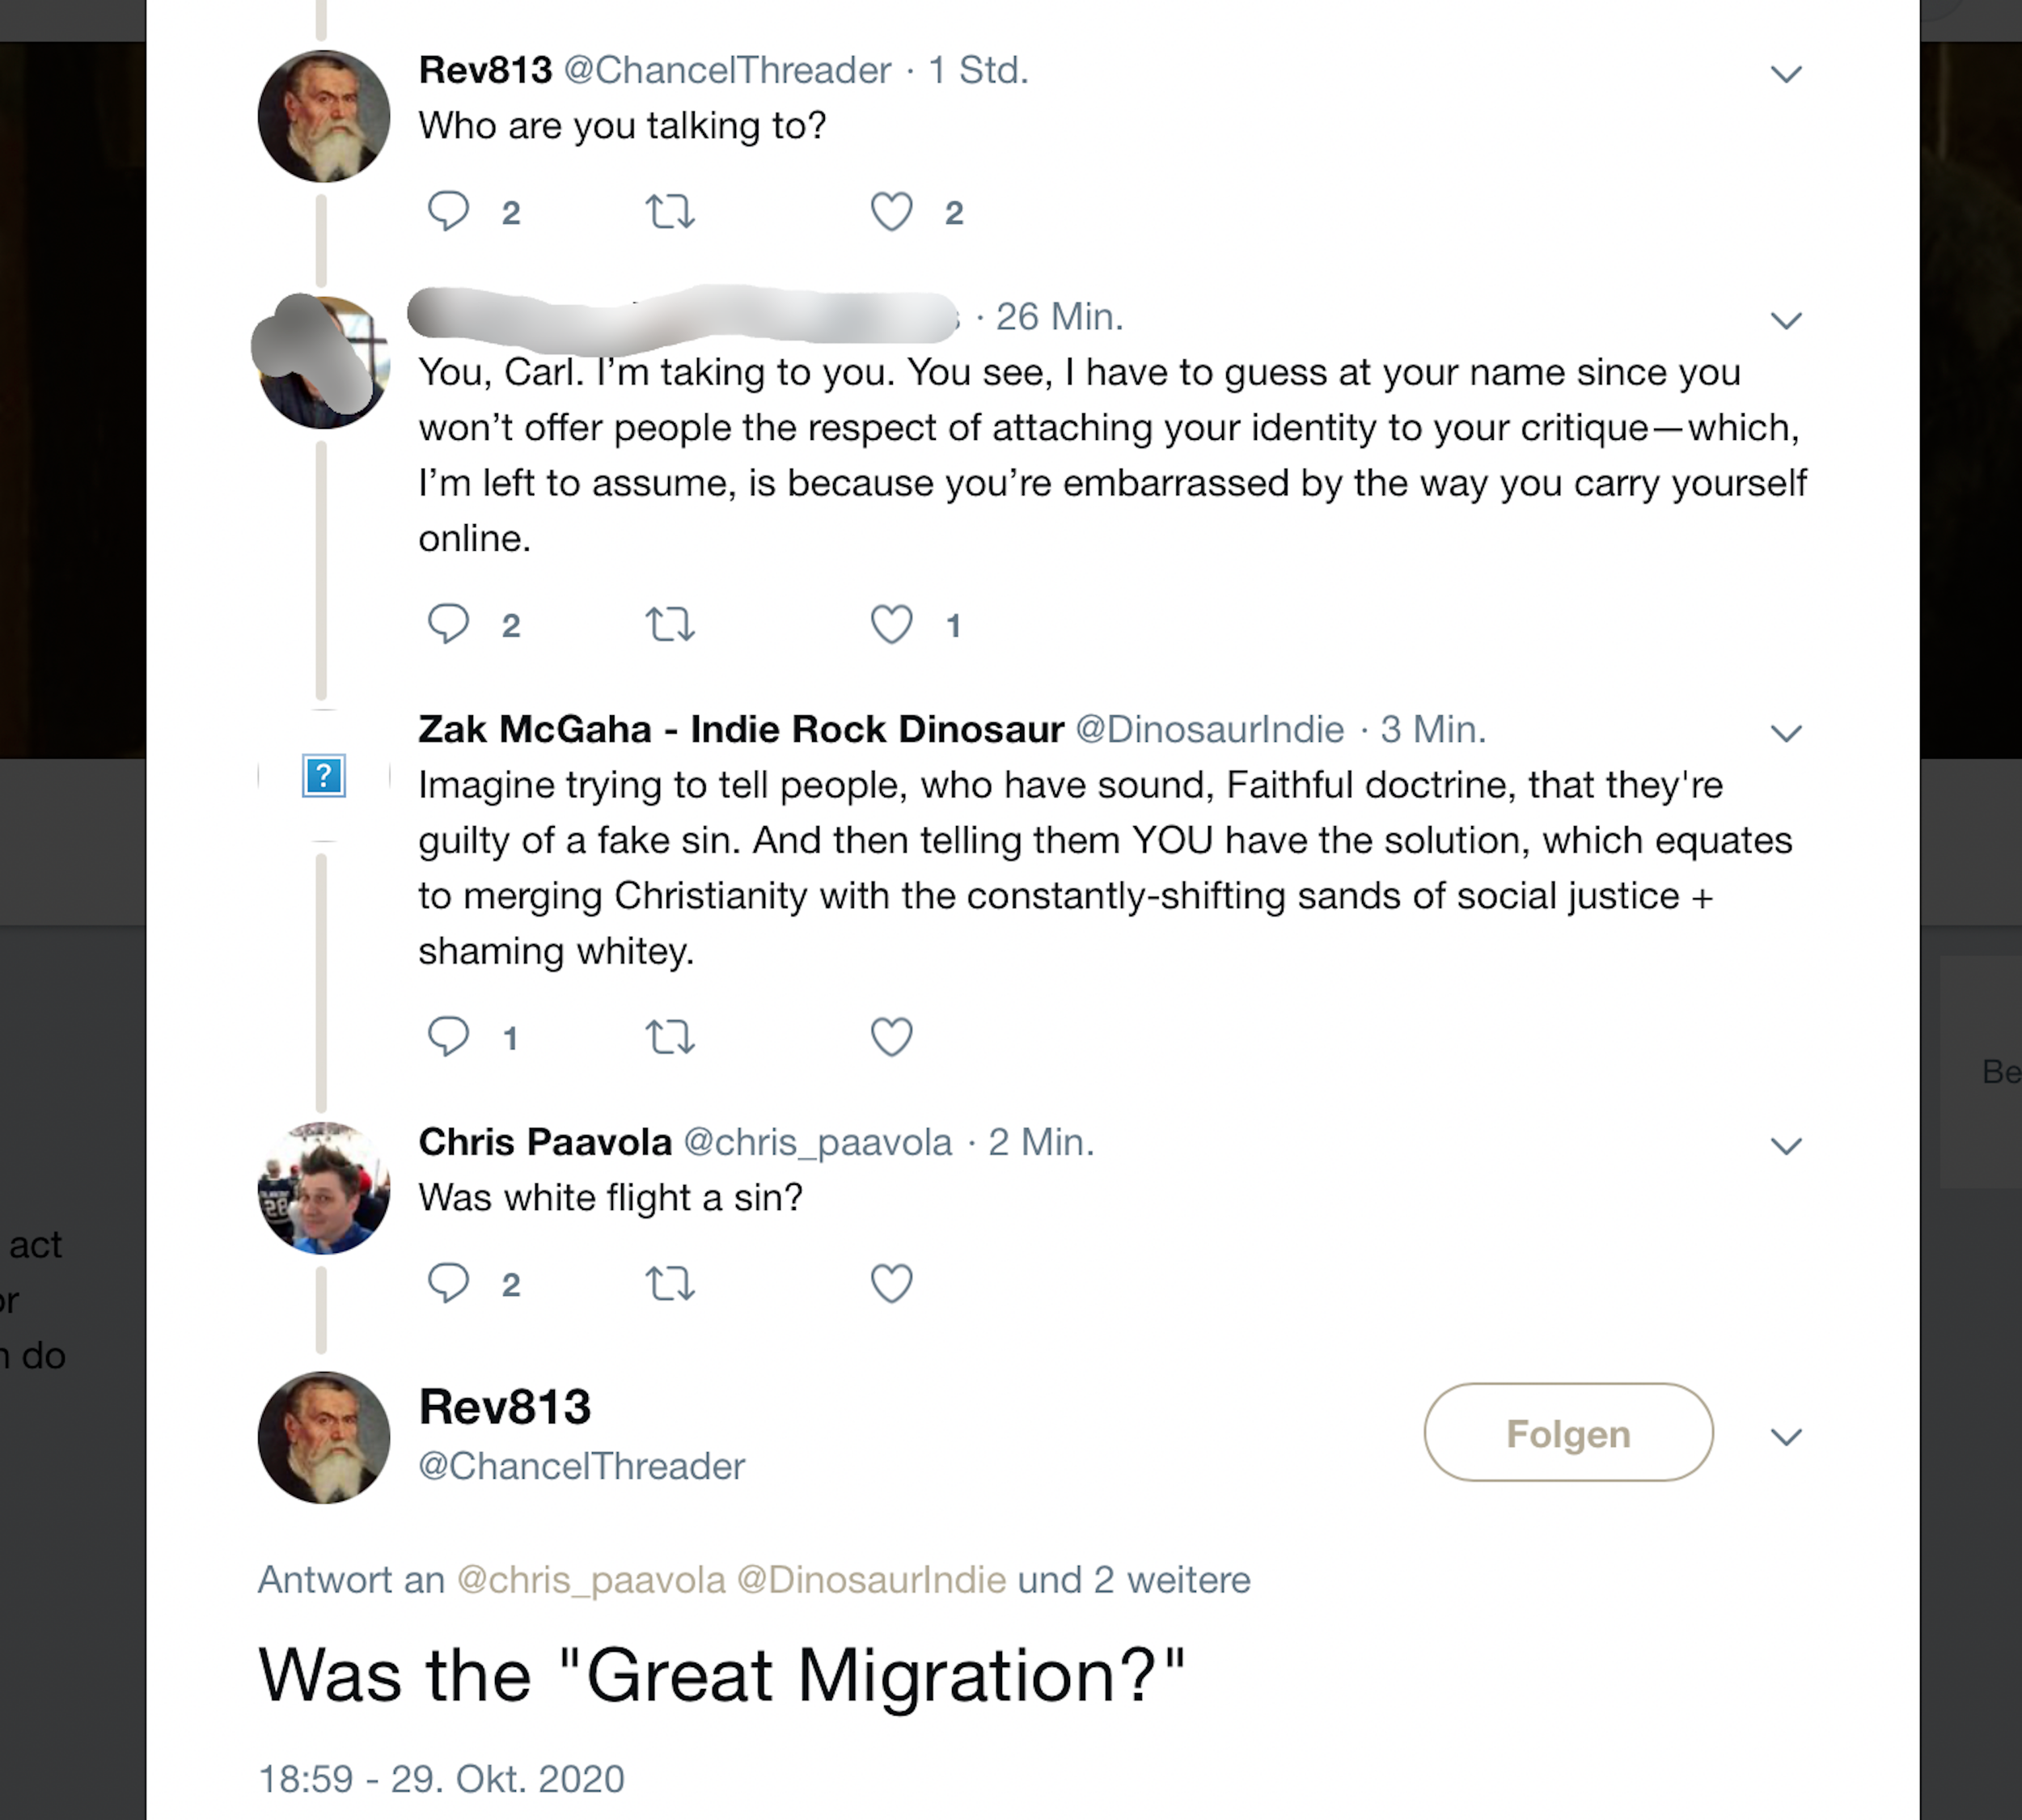 Interaction amongst Woe, Zak McGaha, Matt Popovits, and Chris Paavola, in which Zak says that those criticizing Woe are guilty of making up a “fake sin” of racism. Woe implies that the Great Migration was a sin.